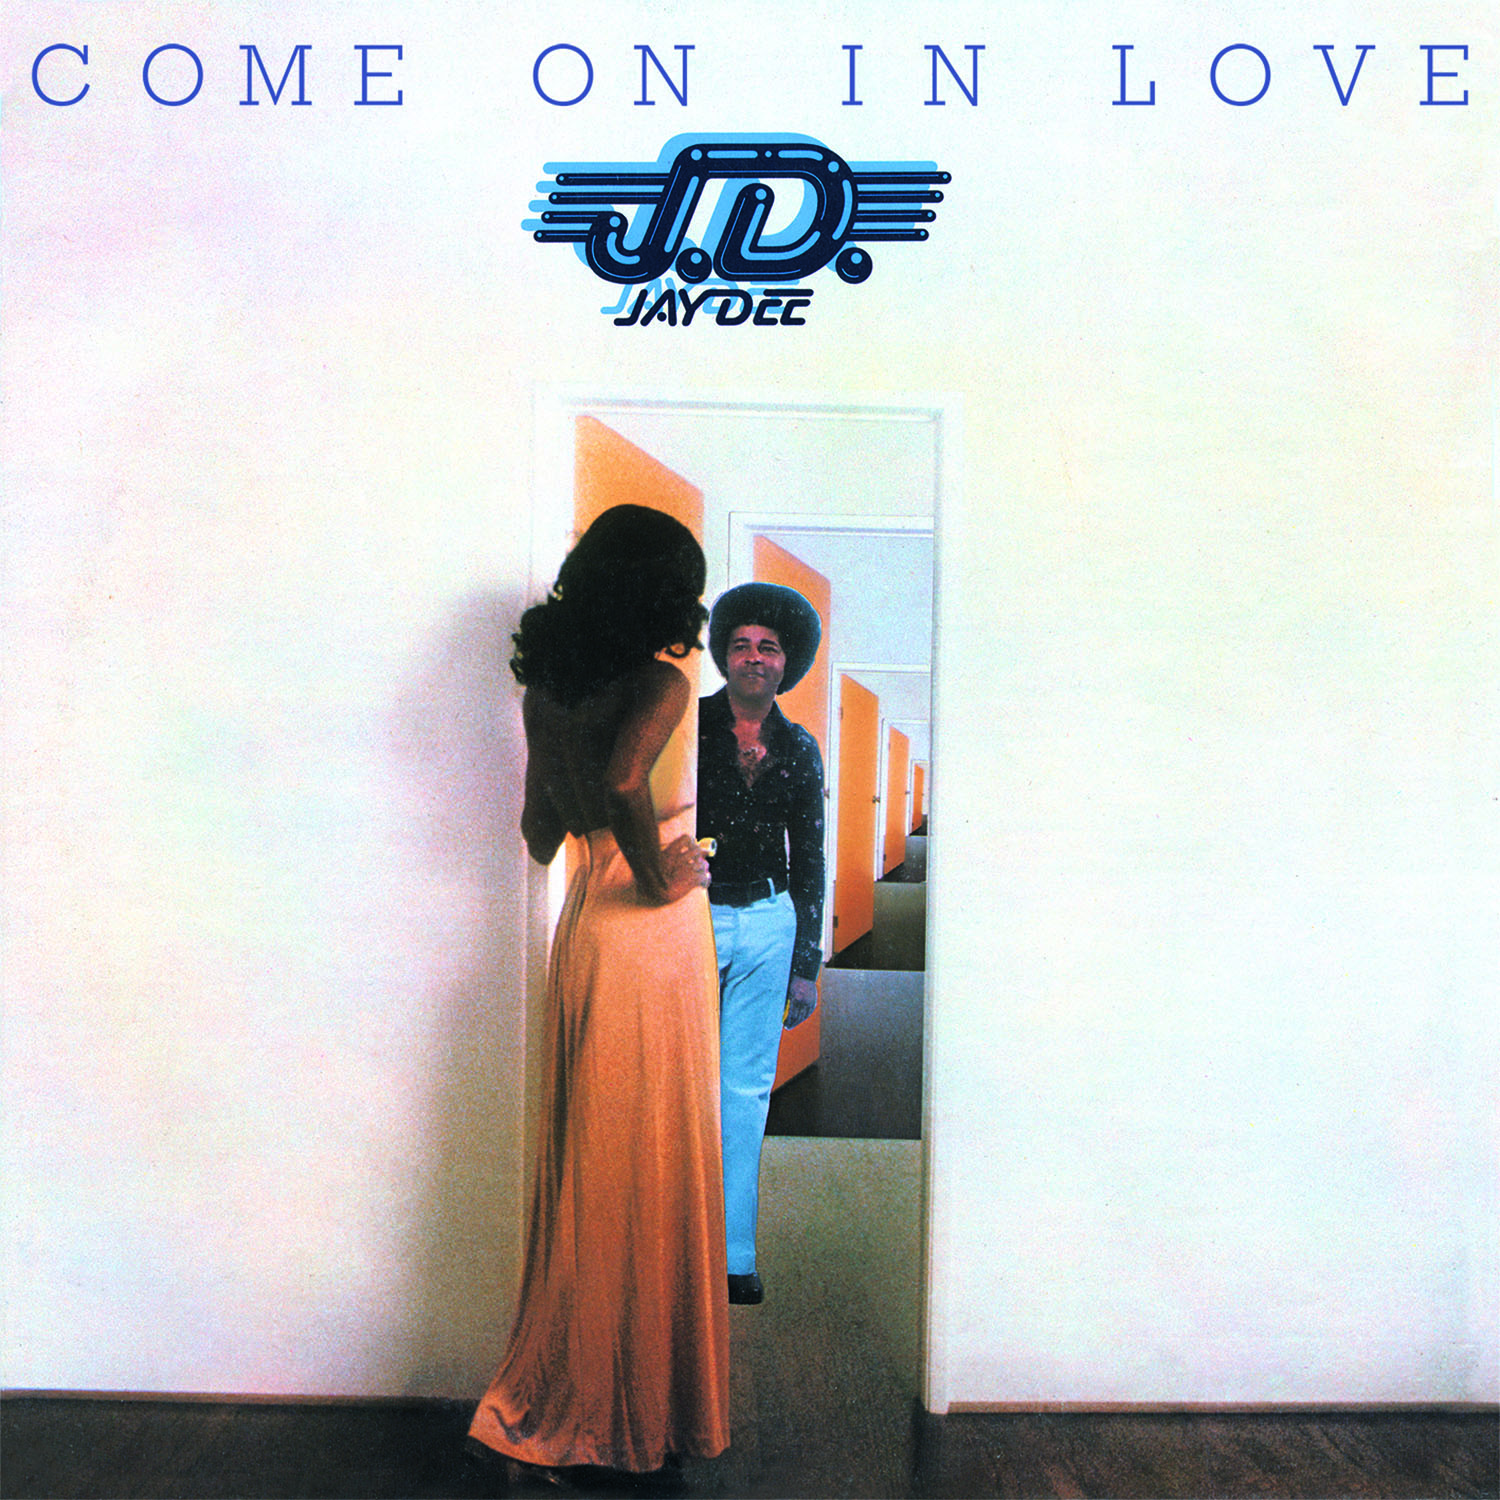 Jay Dee/COME ON IN LOVE (EXPANDED) CD